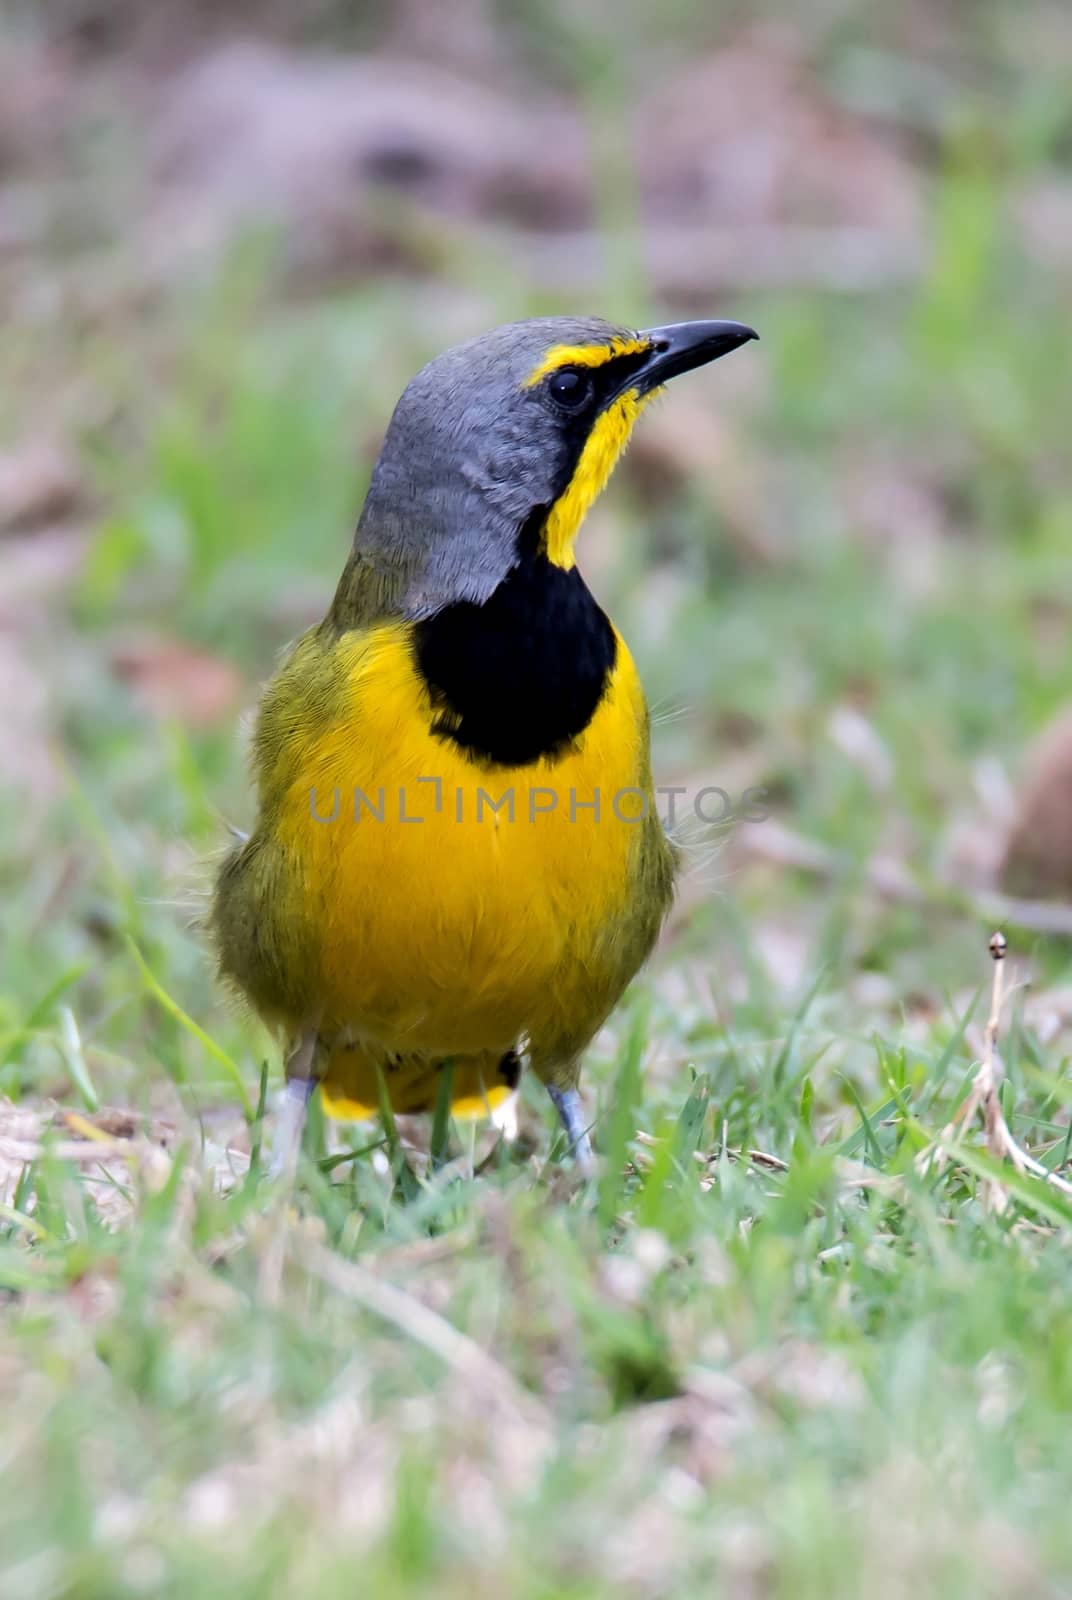 Striking yellow and black Bokmakierie bird from South Africa